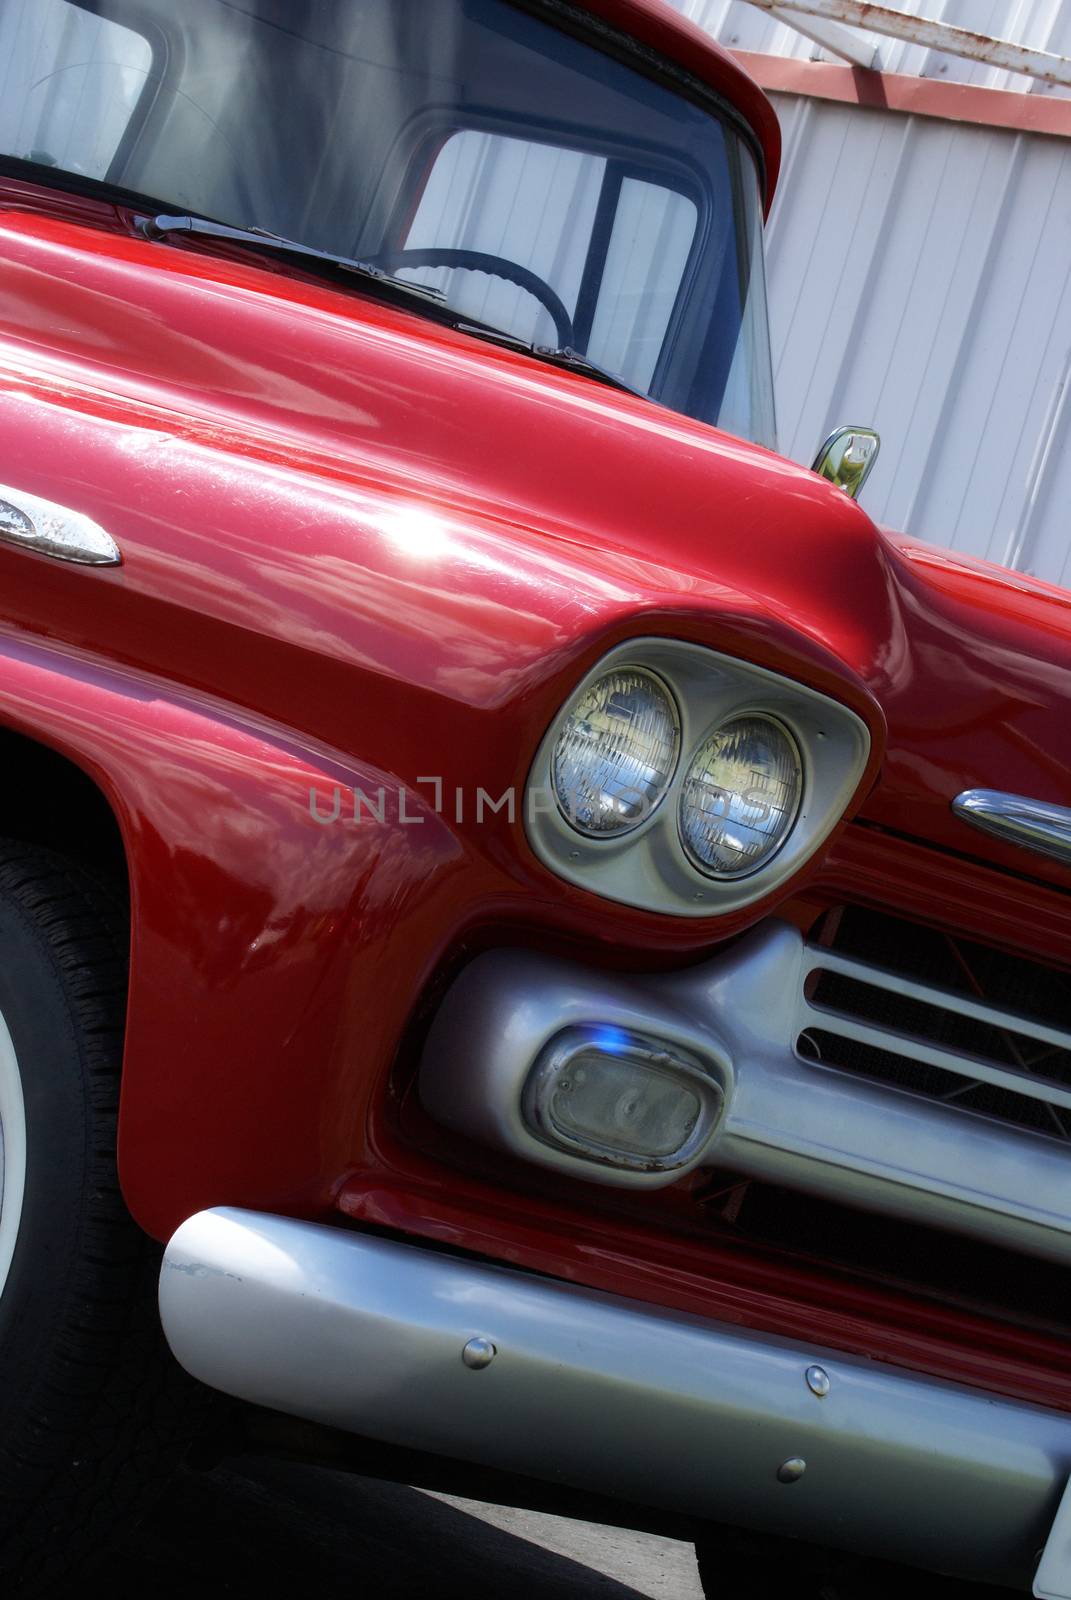 Restored Vintage Truck by AlphaBaby